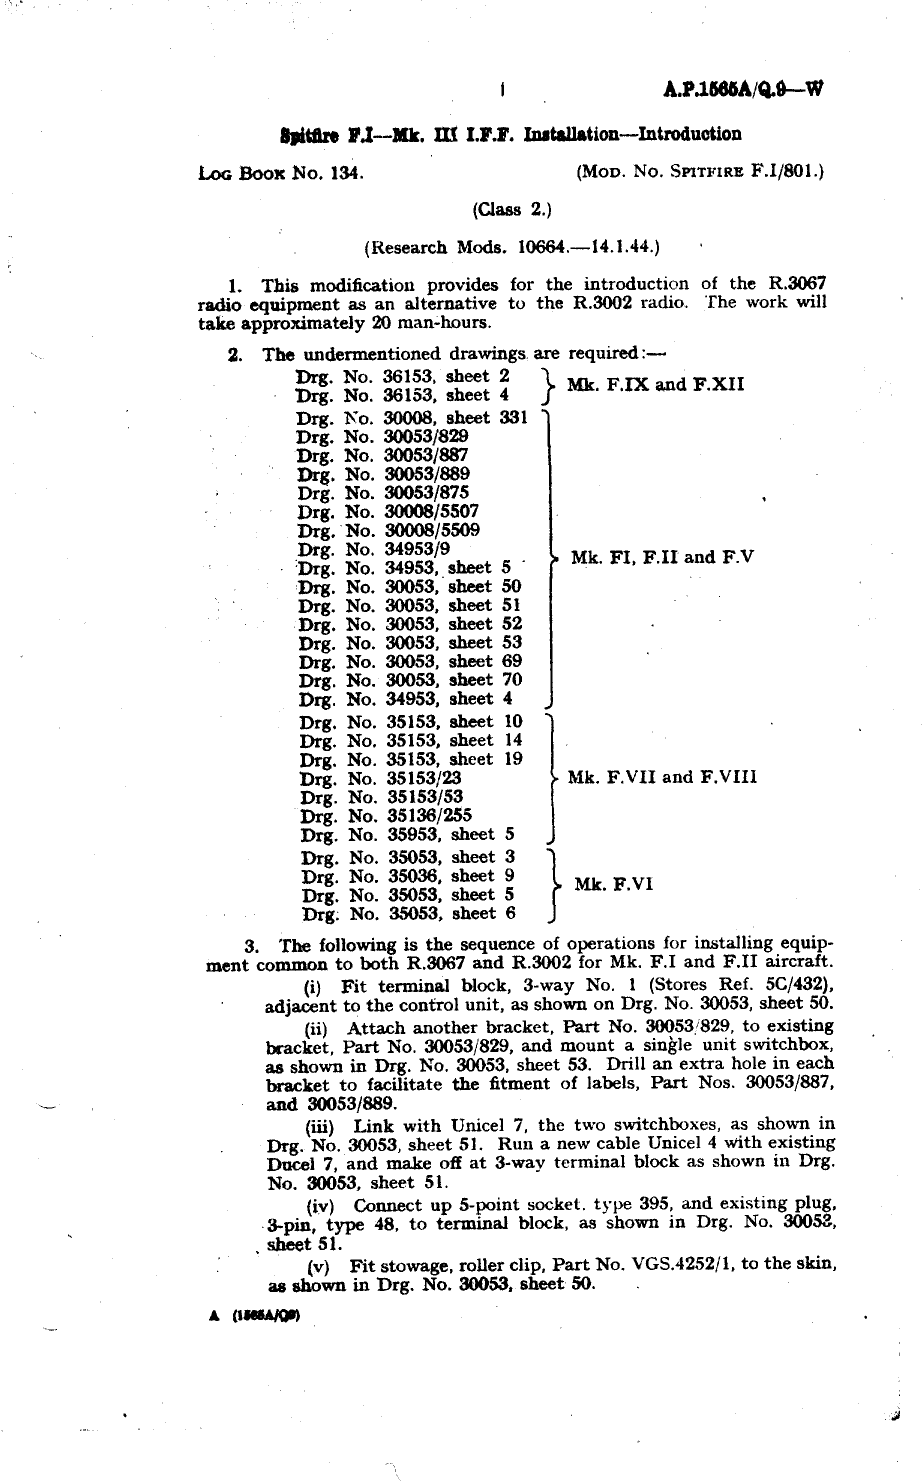 Sample page 1 from AirCorps Library document: Spitfire F.I Mk. III I.F.F. Installation Introduction